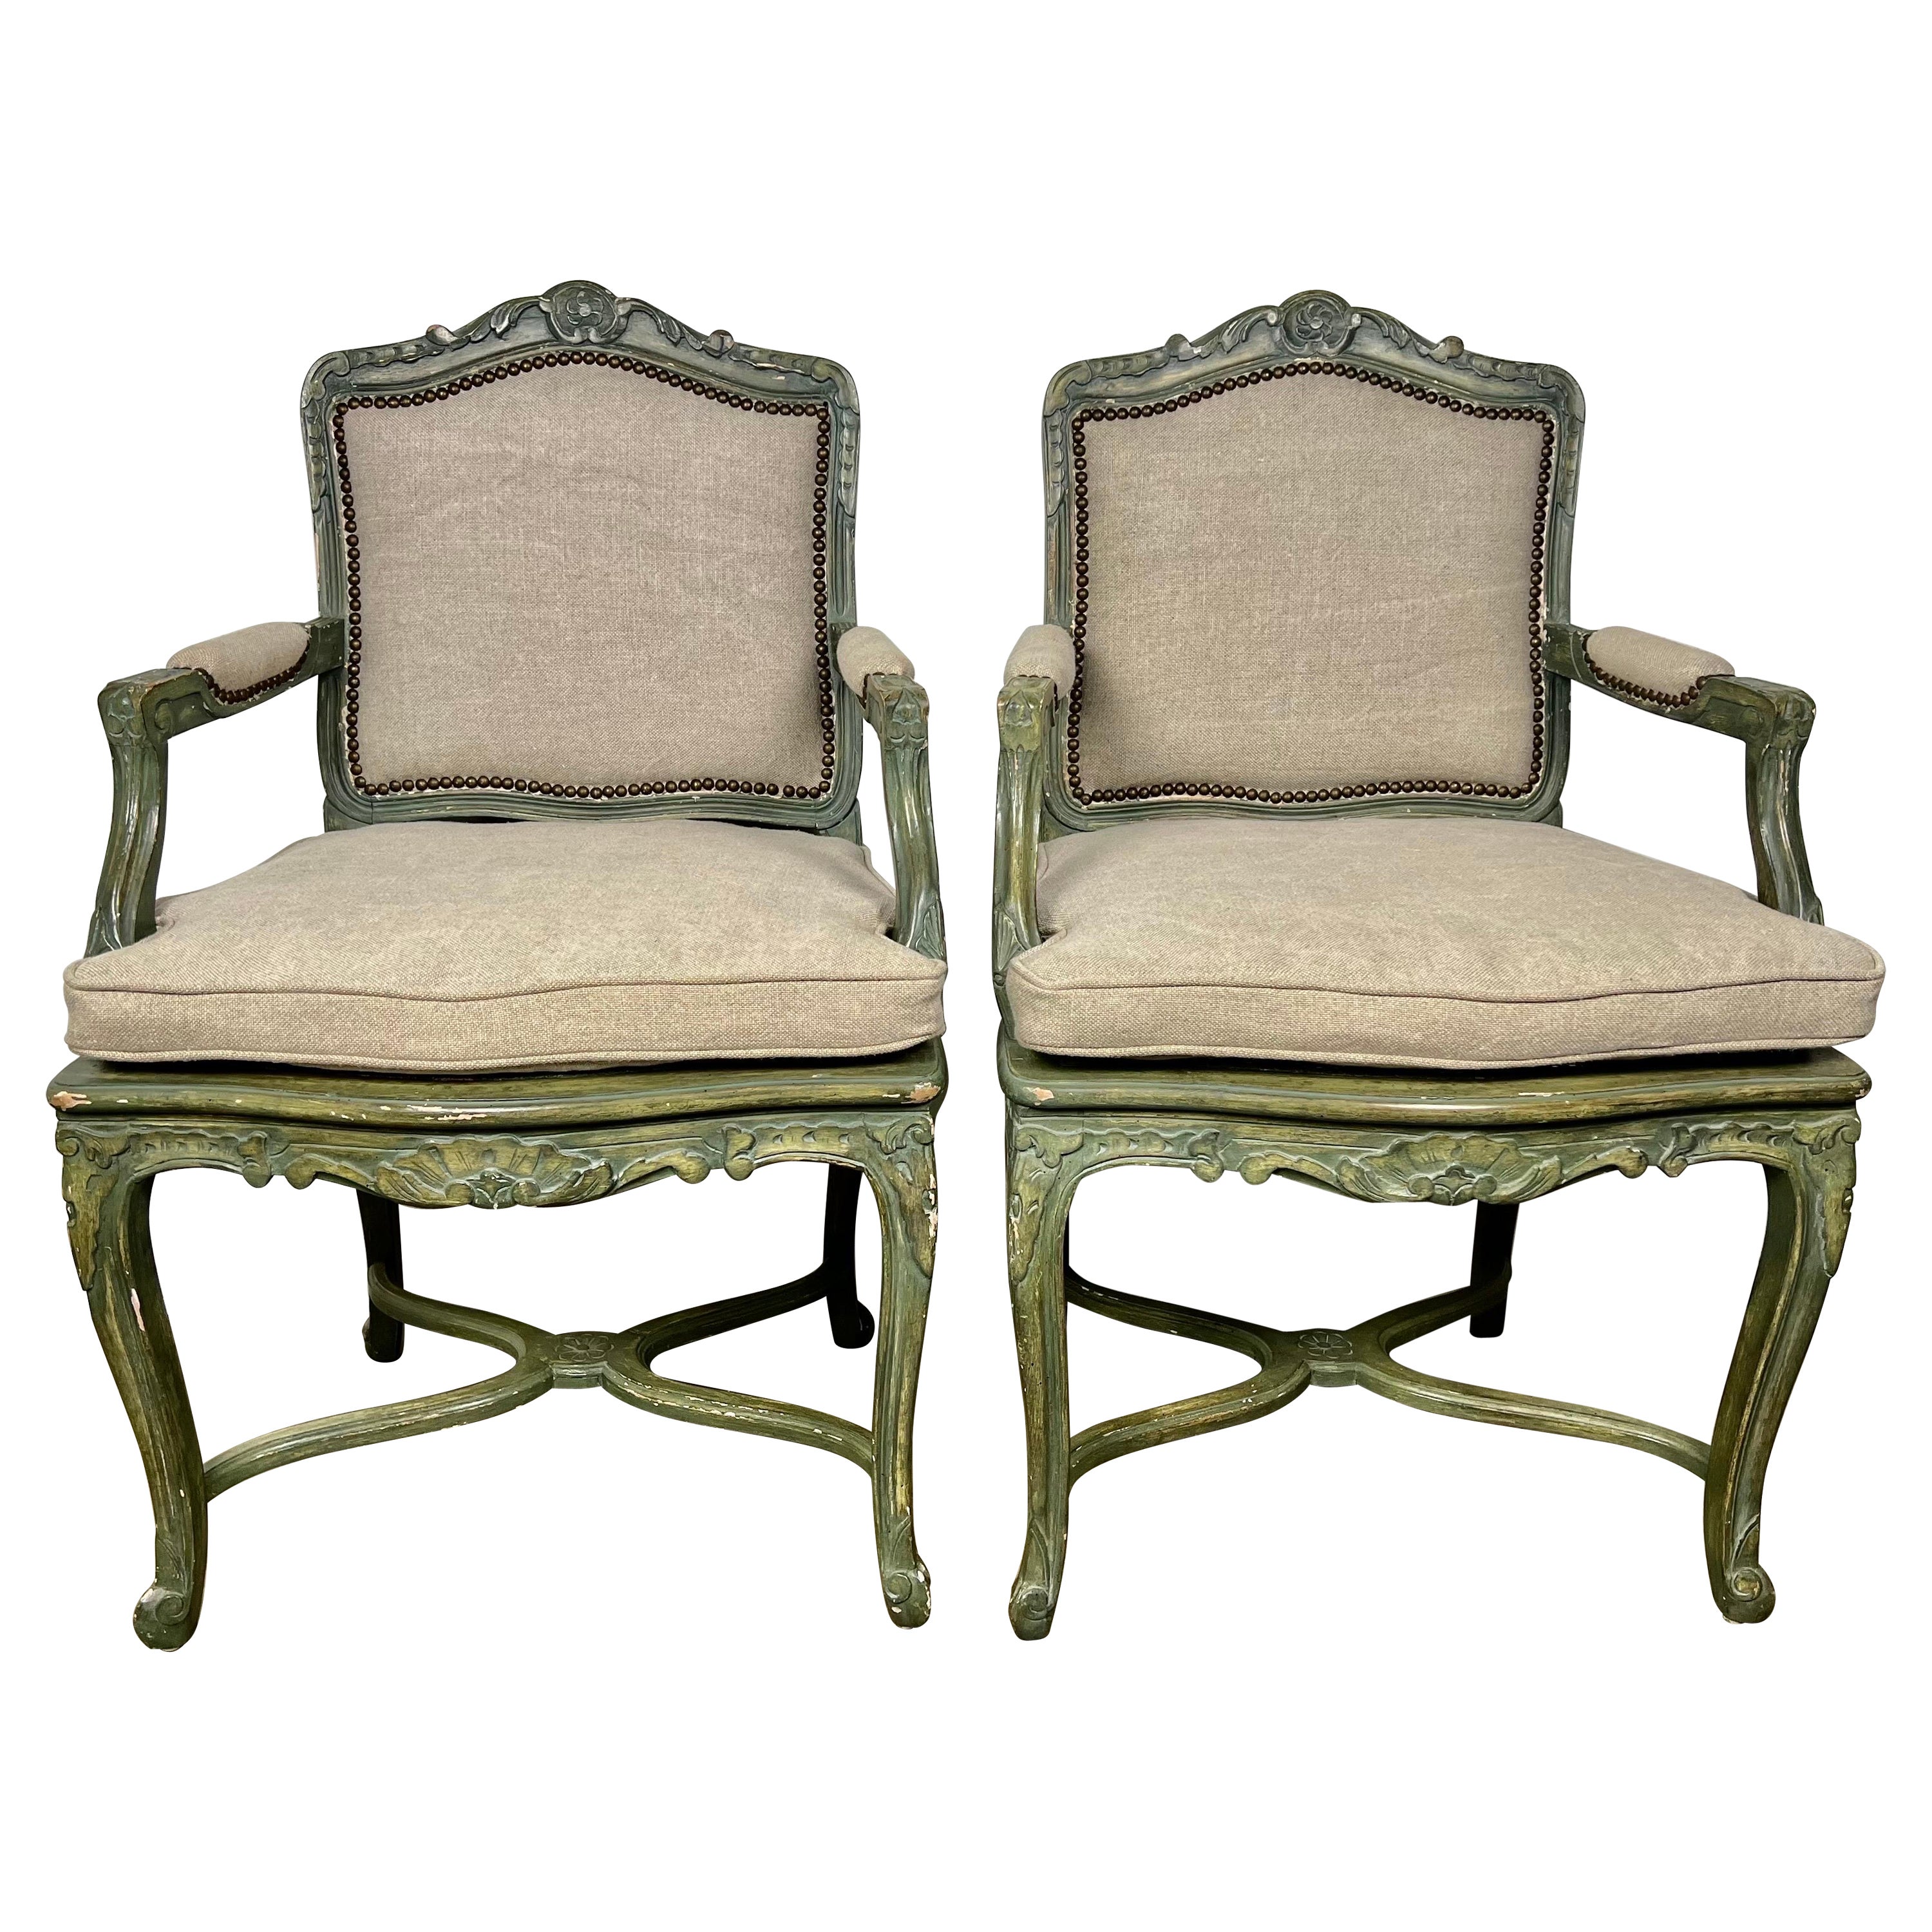 Pair of French Painted Cane Seat Armchairs with Cushions For Sale